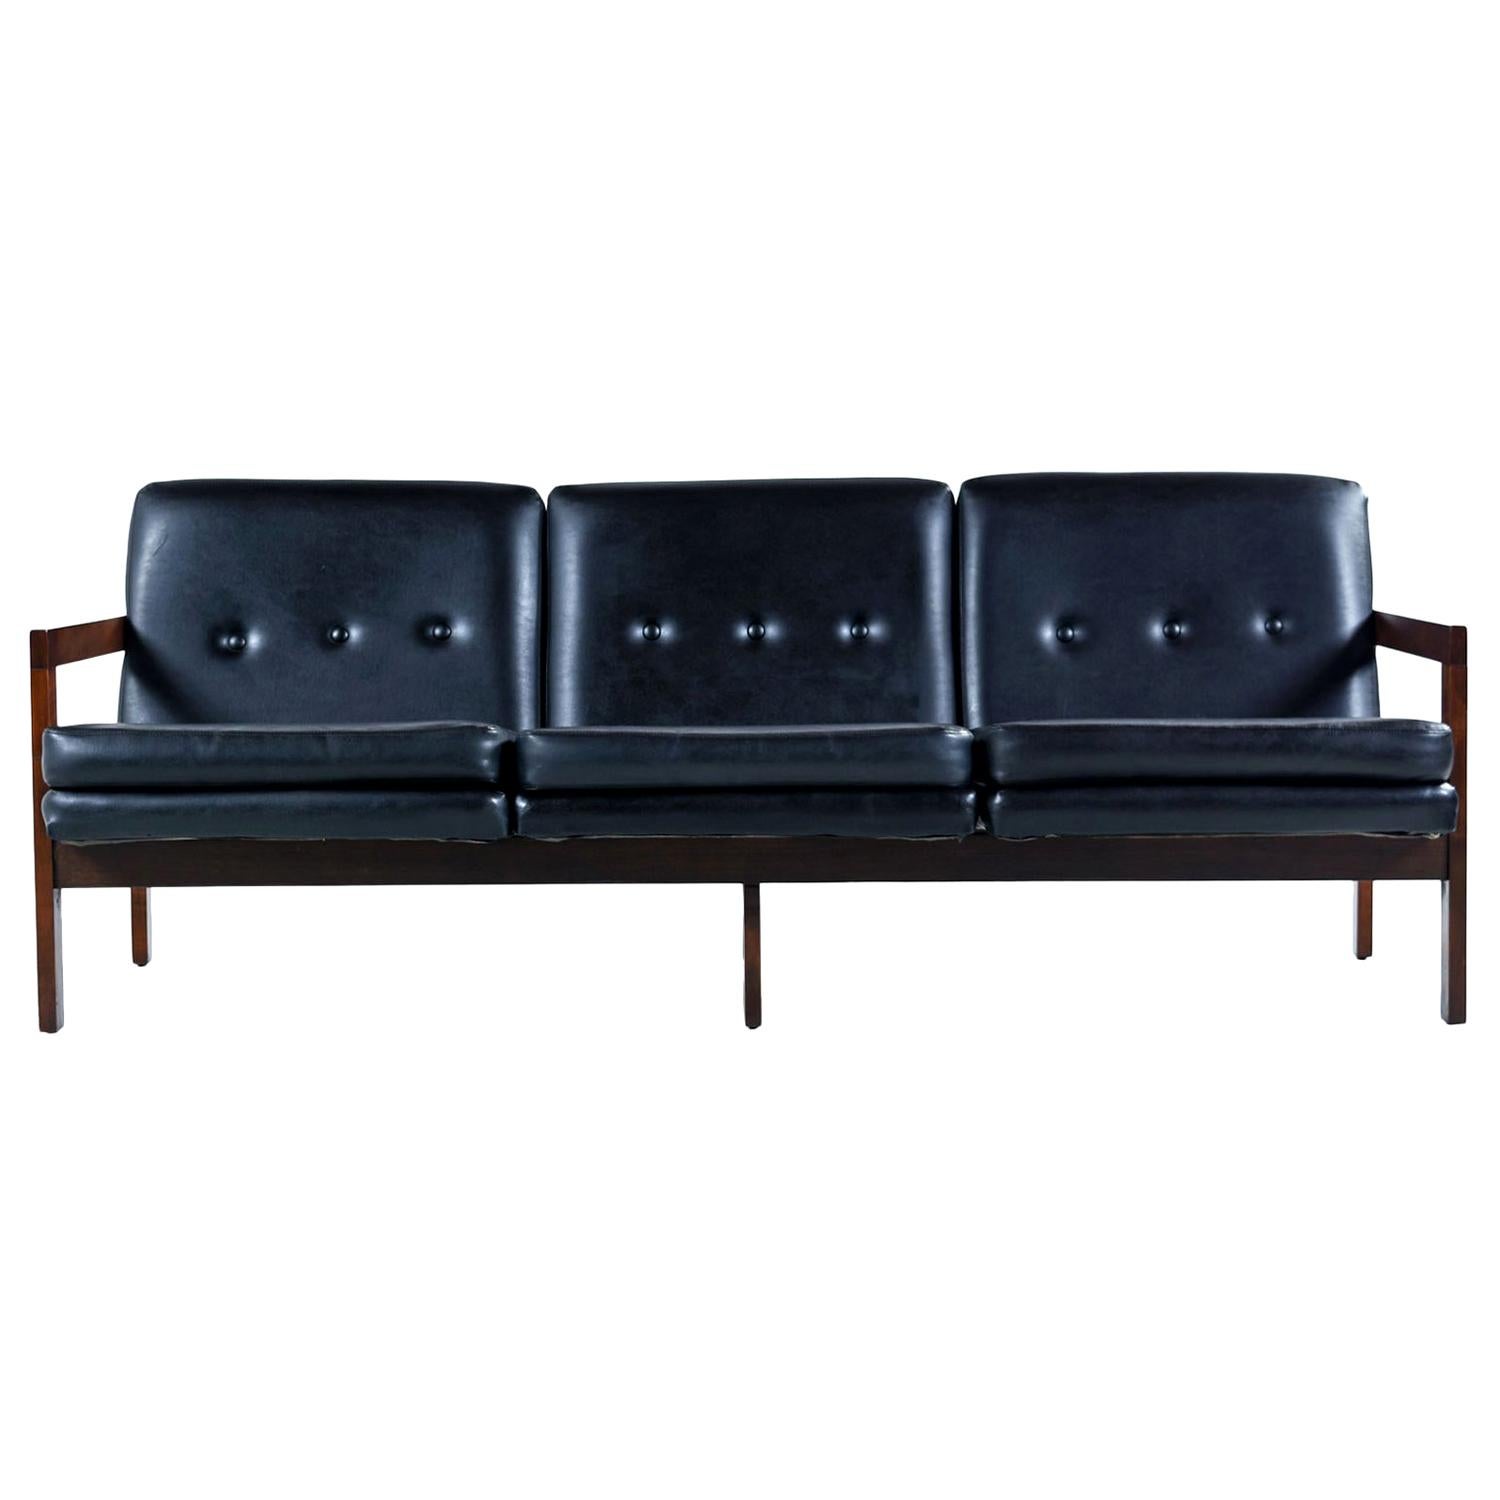 Mid-Century Modern Black Leather Sofa Couch Beechwood with Button Tufted Backs